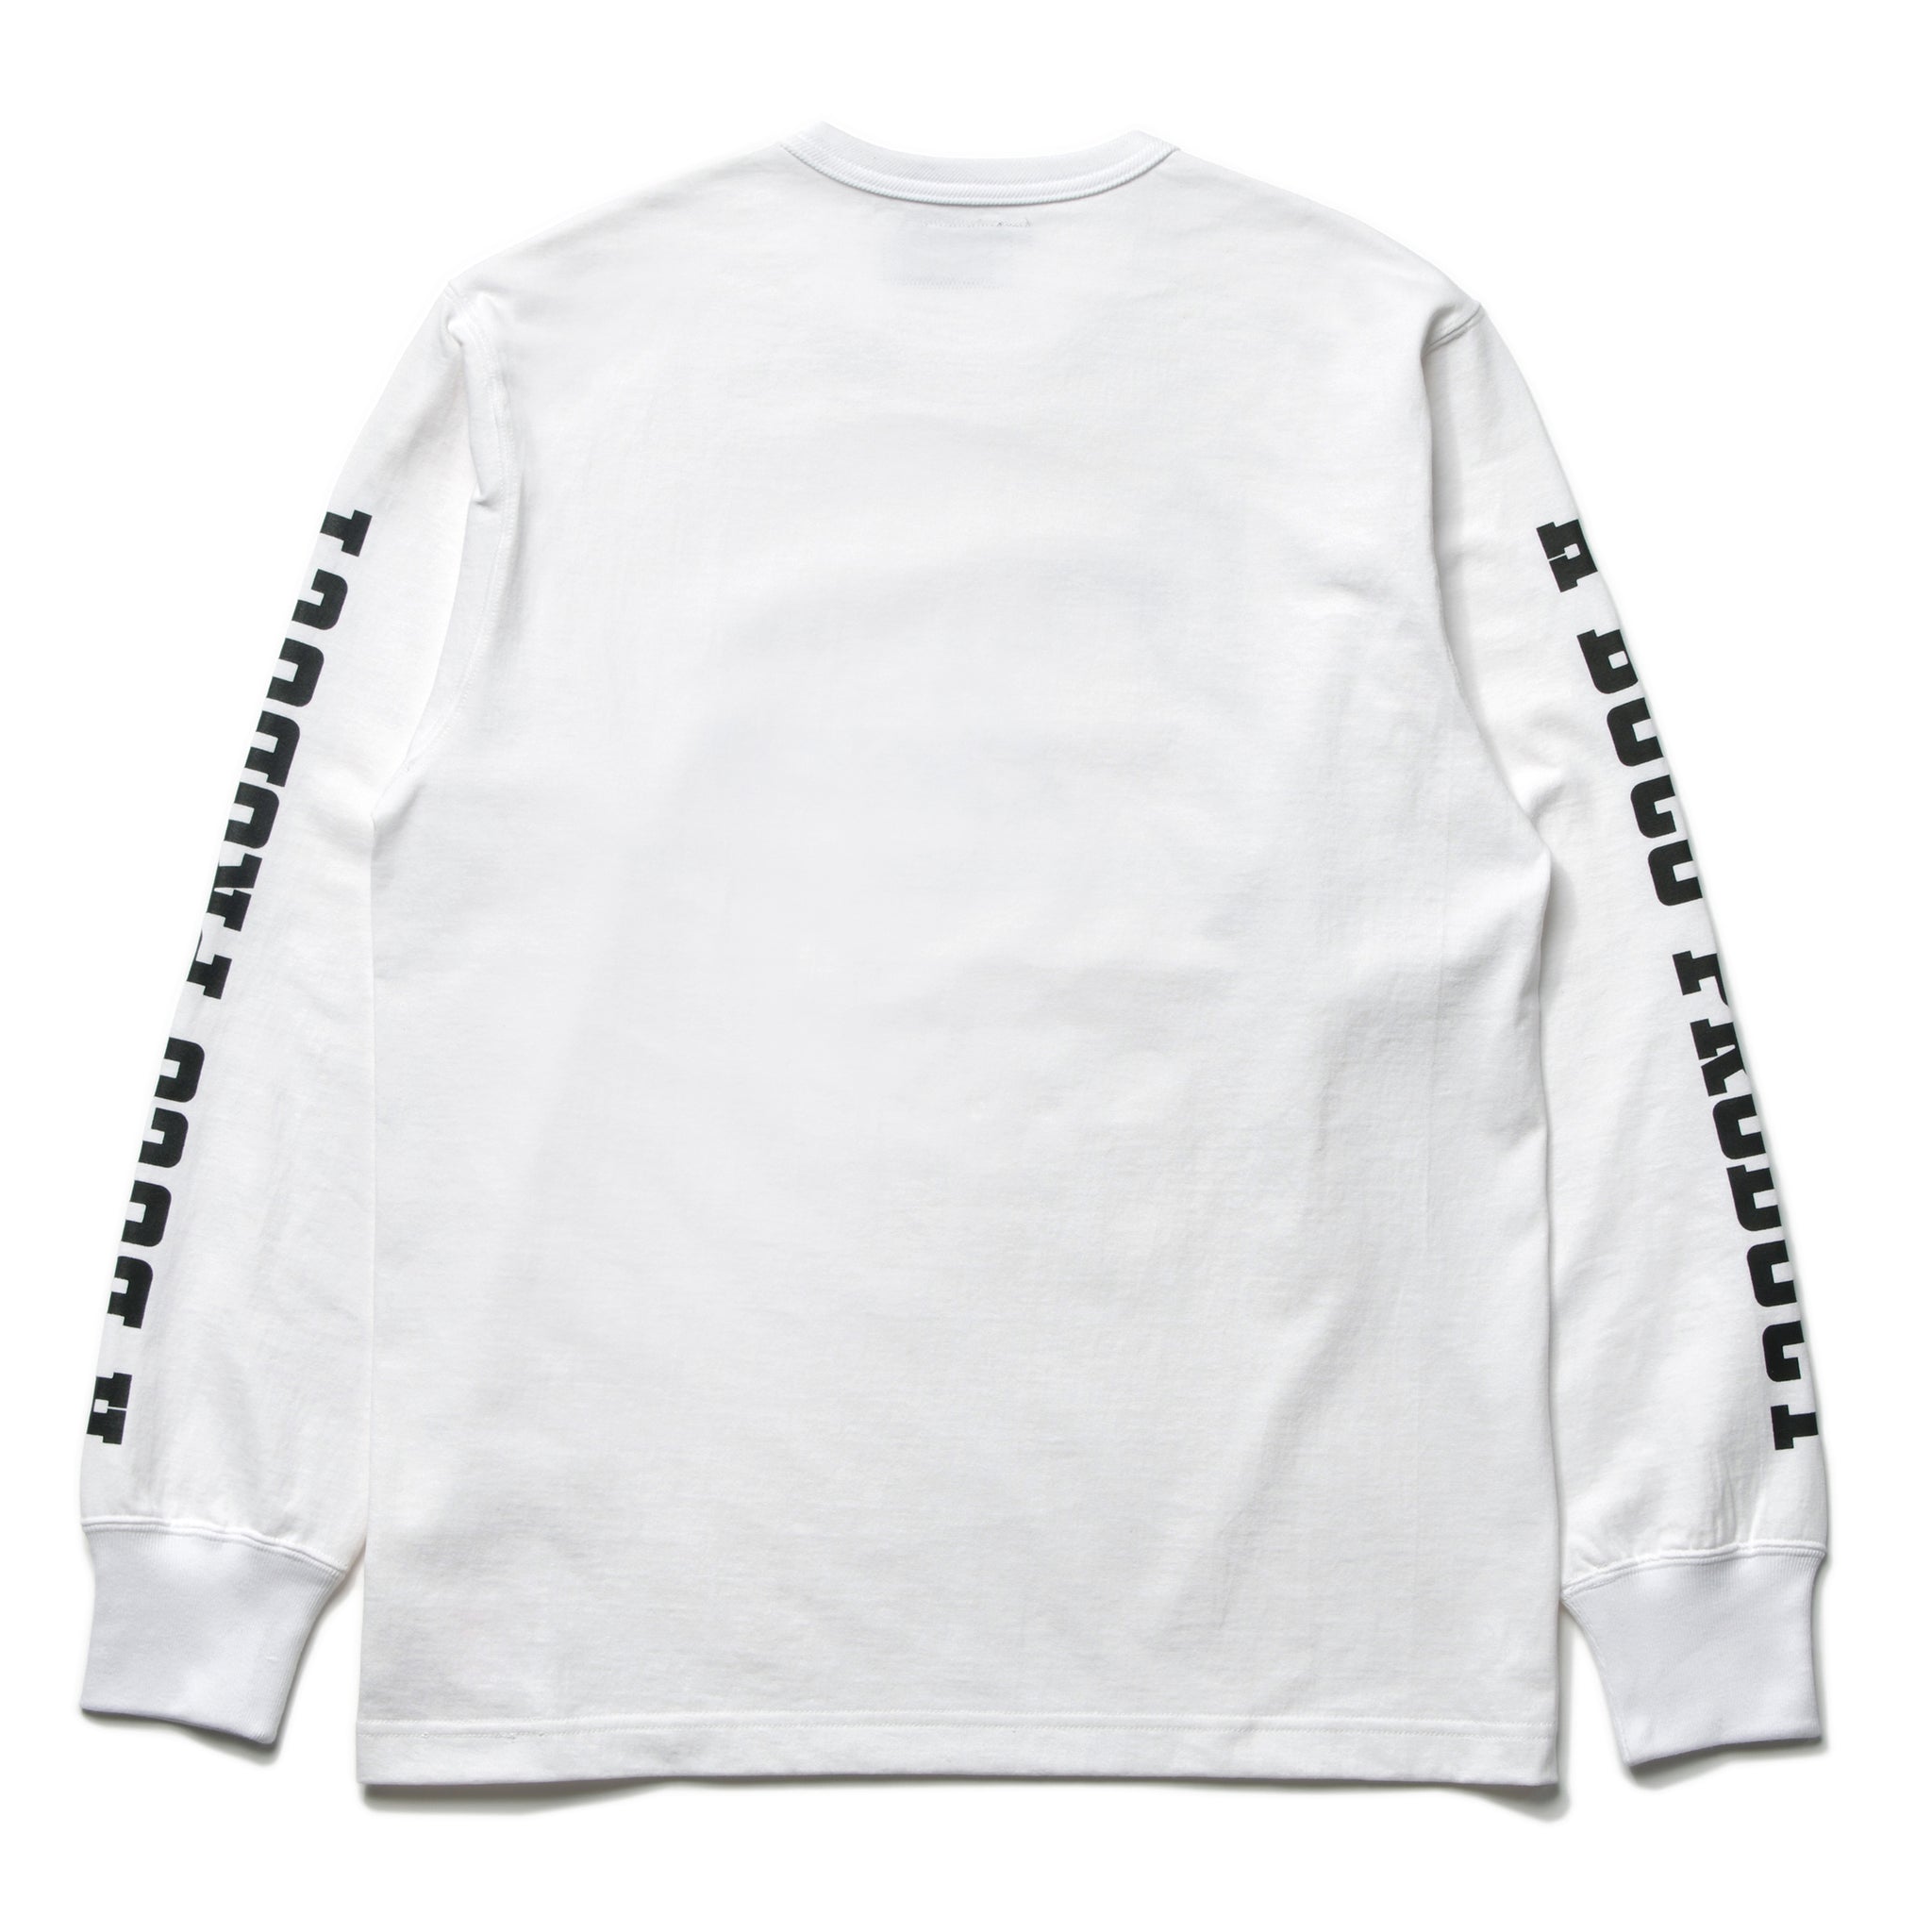 BUCO L/S TEE / THIS IS AN ORIGINAL BUCO